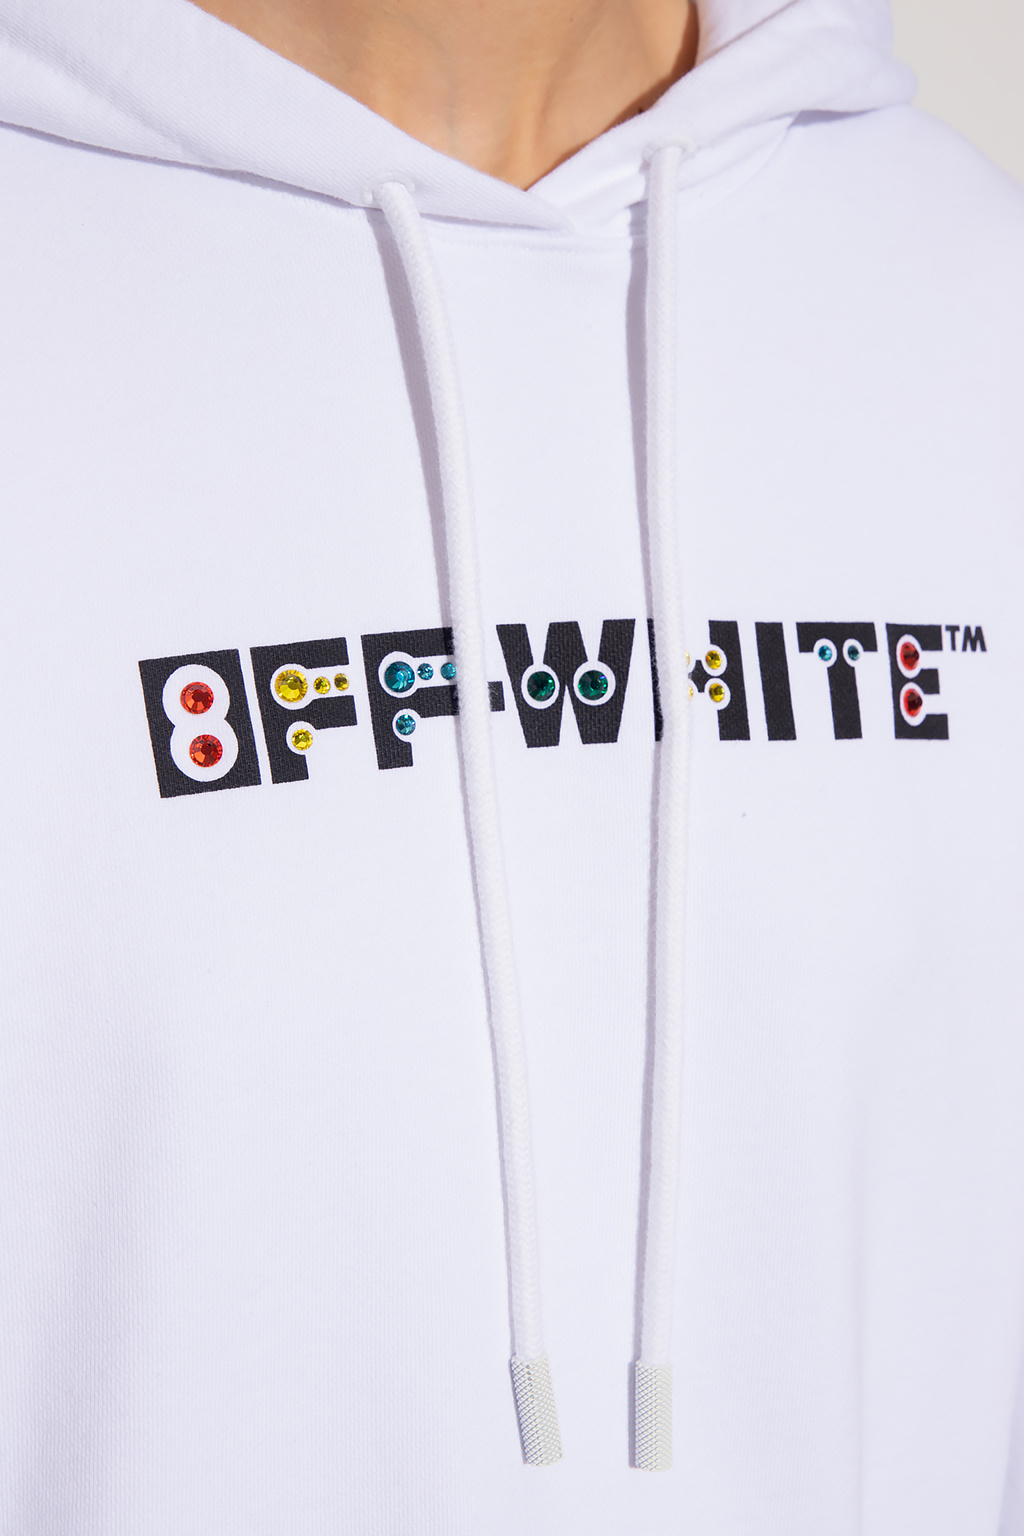 Off-White Alchemist Wasted Youth cotton T-shirt